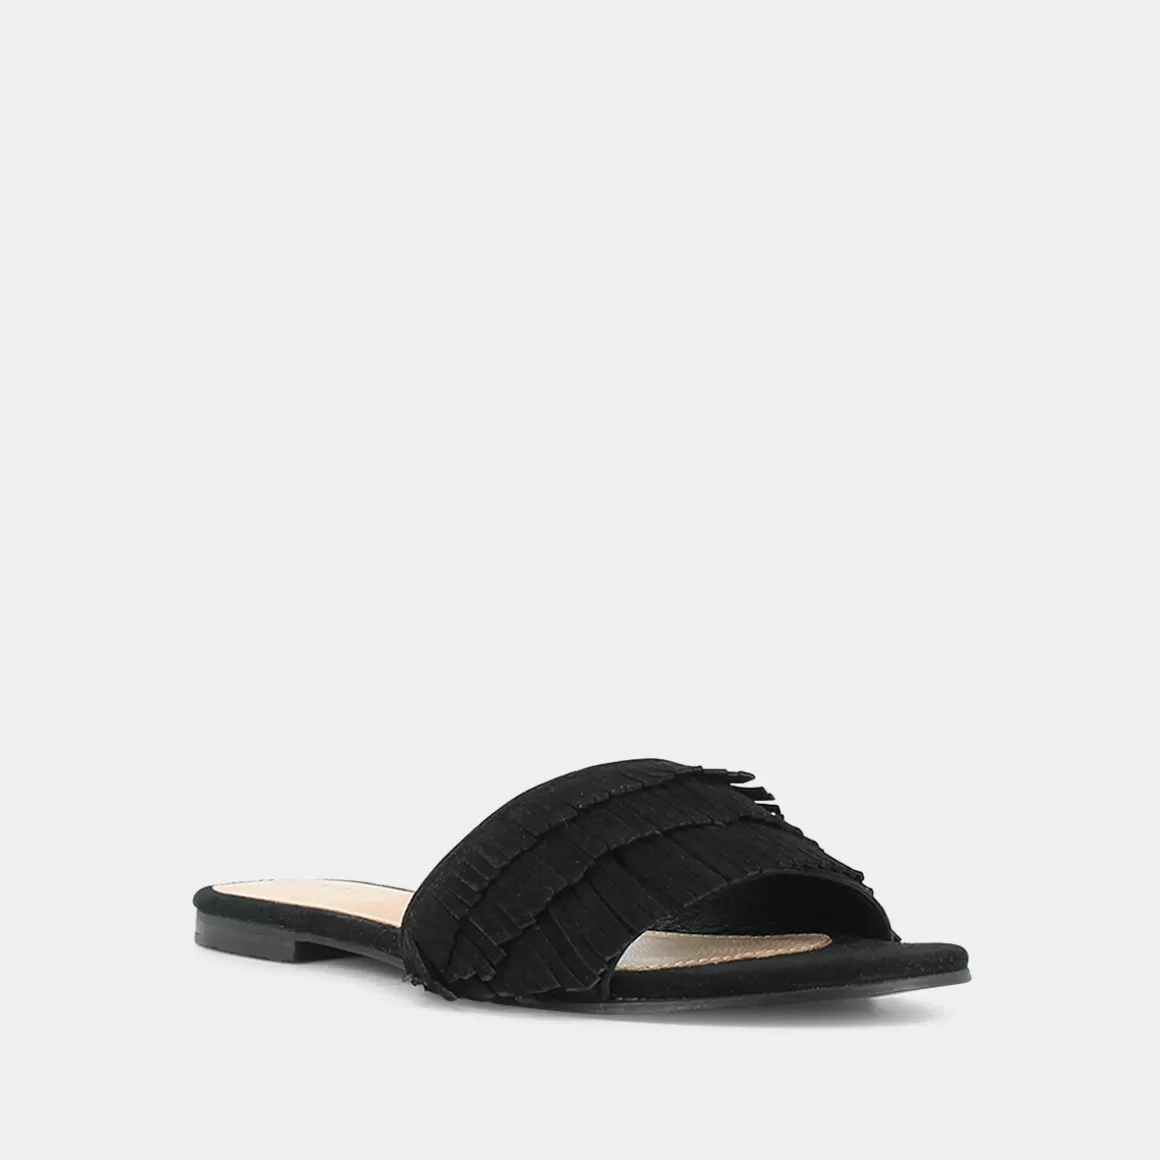 Black suede mules<Jonak Outlet